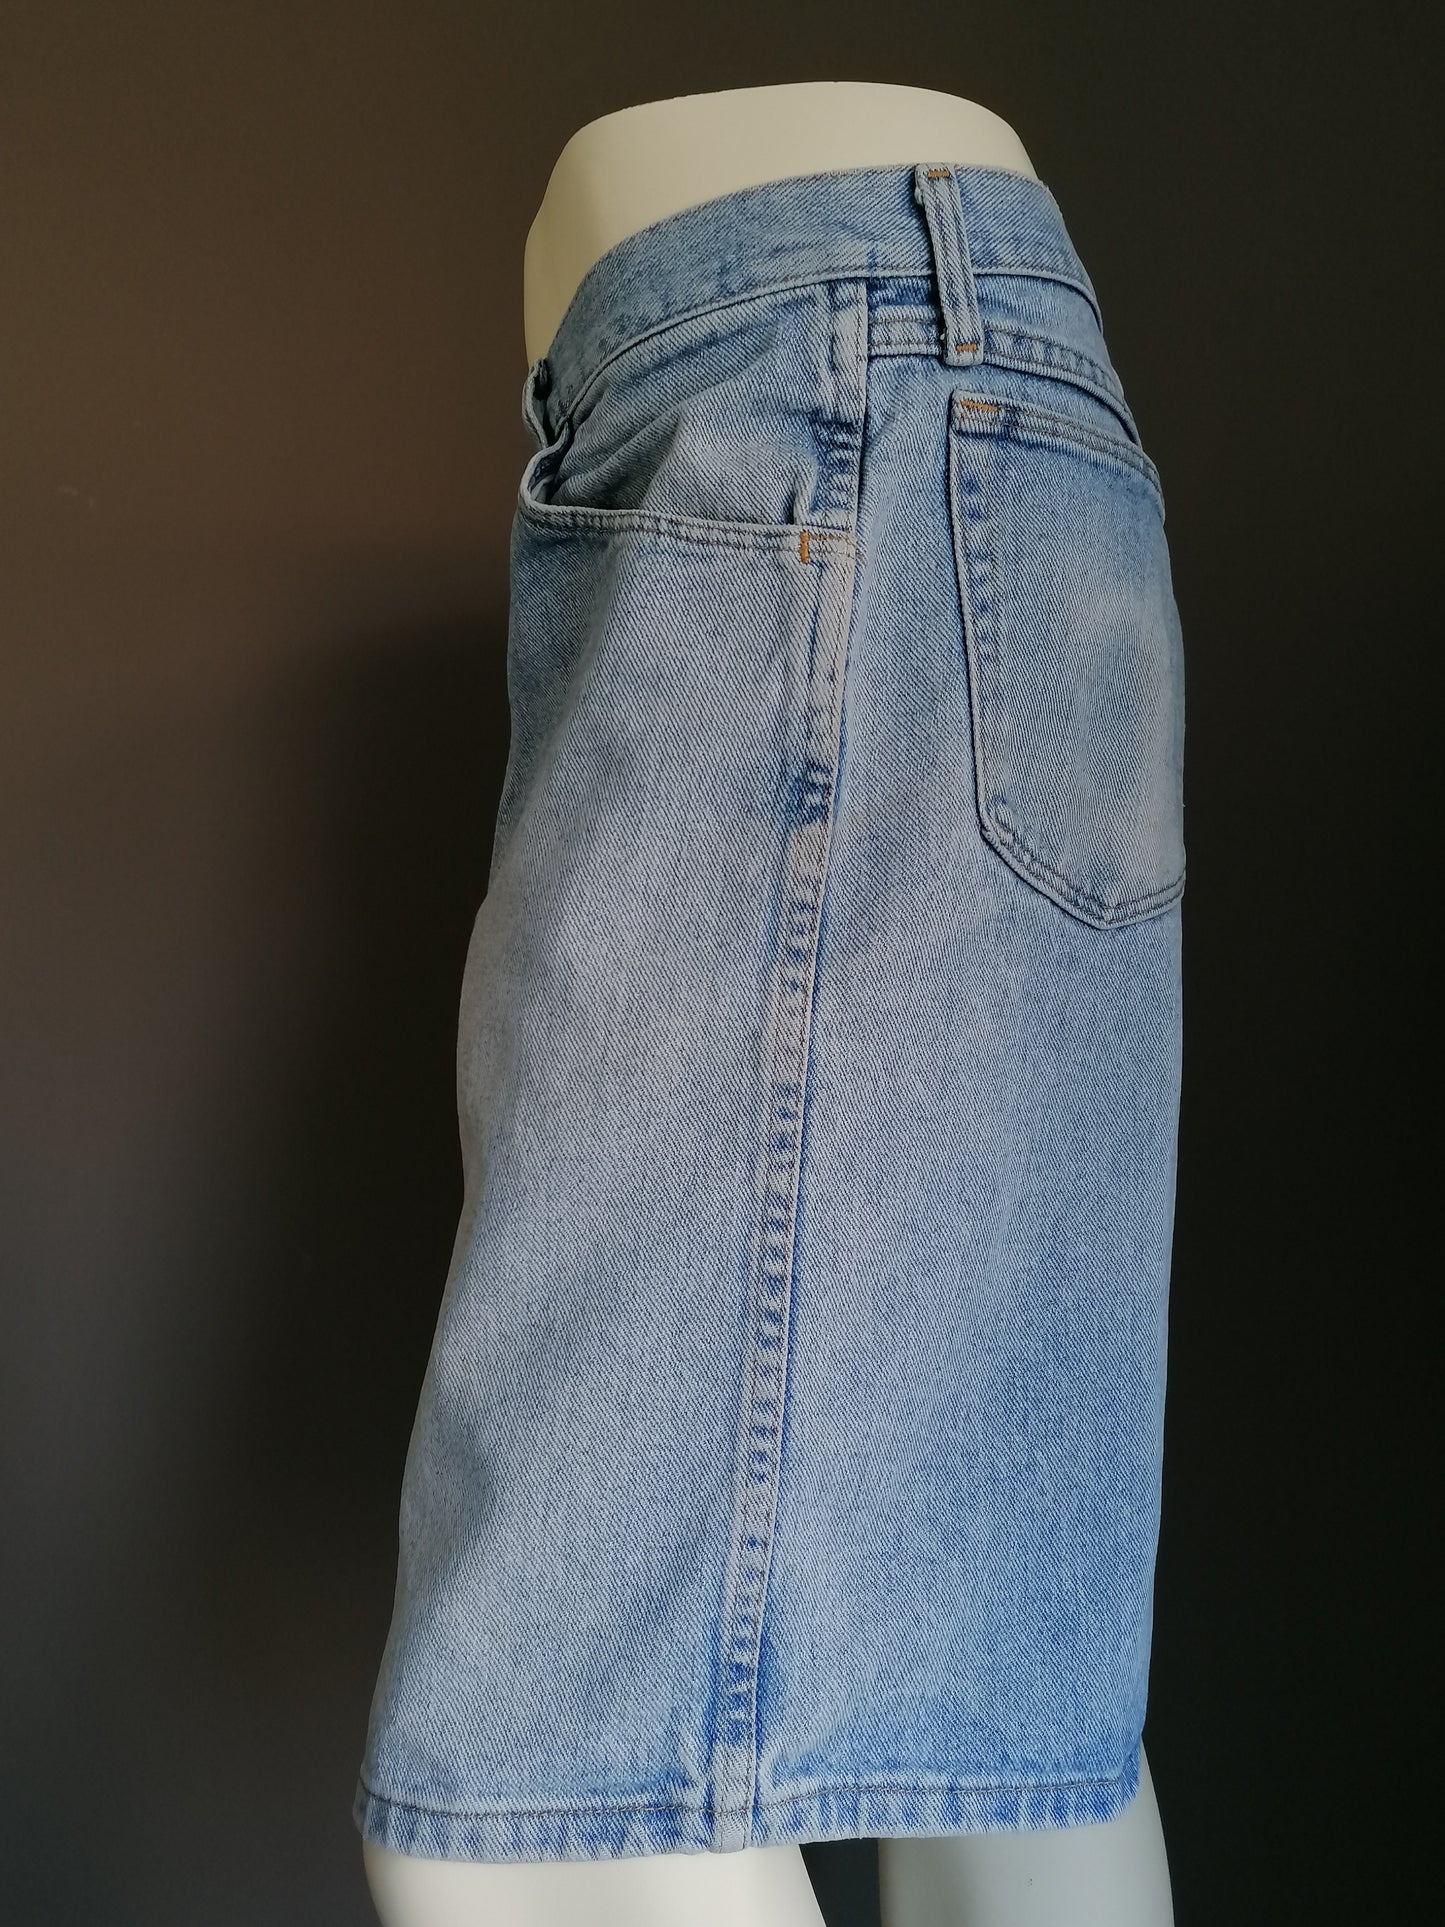 Wrangler jeans shorts. Colored light blue. Size W40.